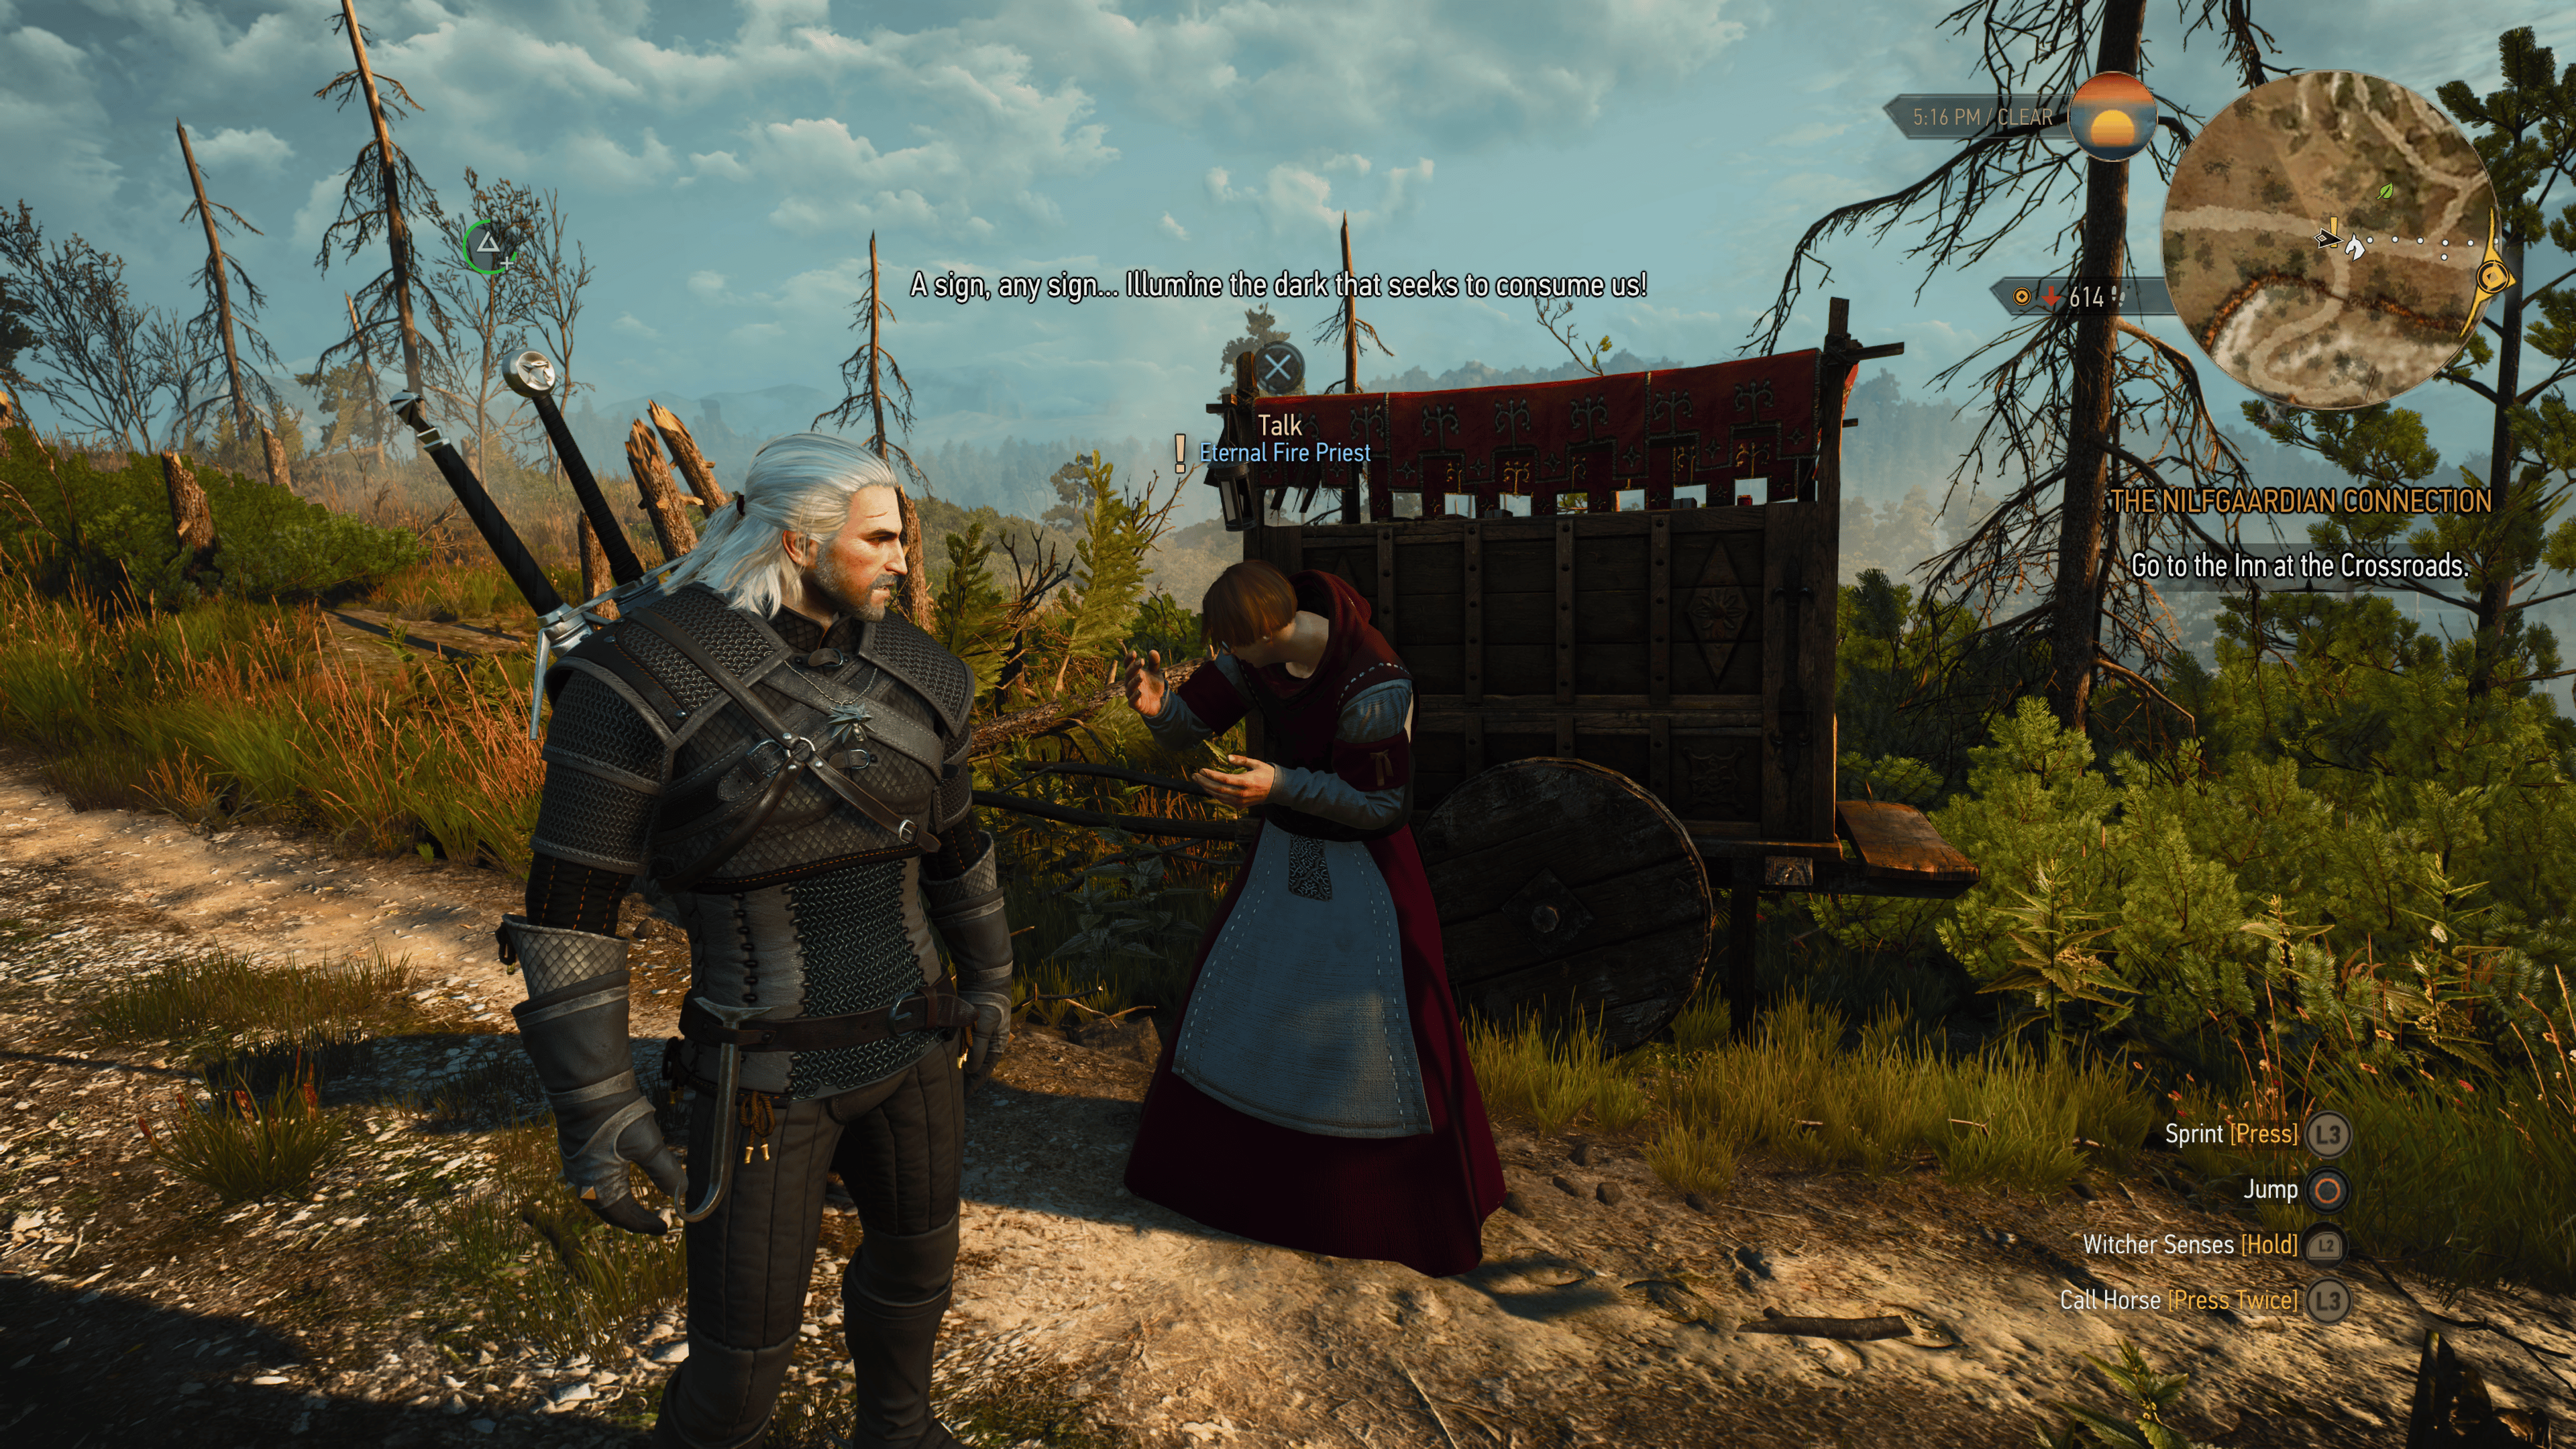 The Witcher 3: how to get Henry Cavill's armor and enable Netflix contents  - Meristation